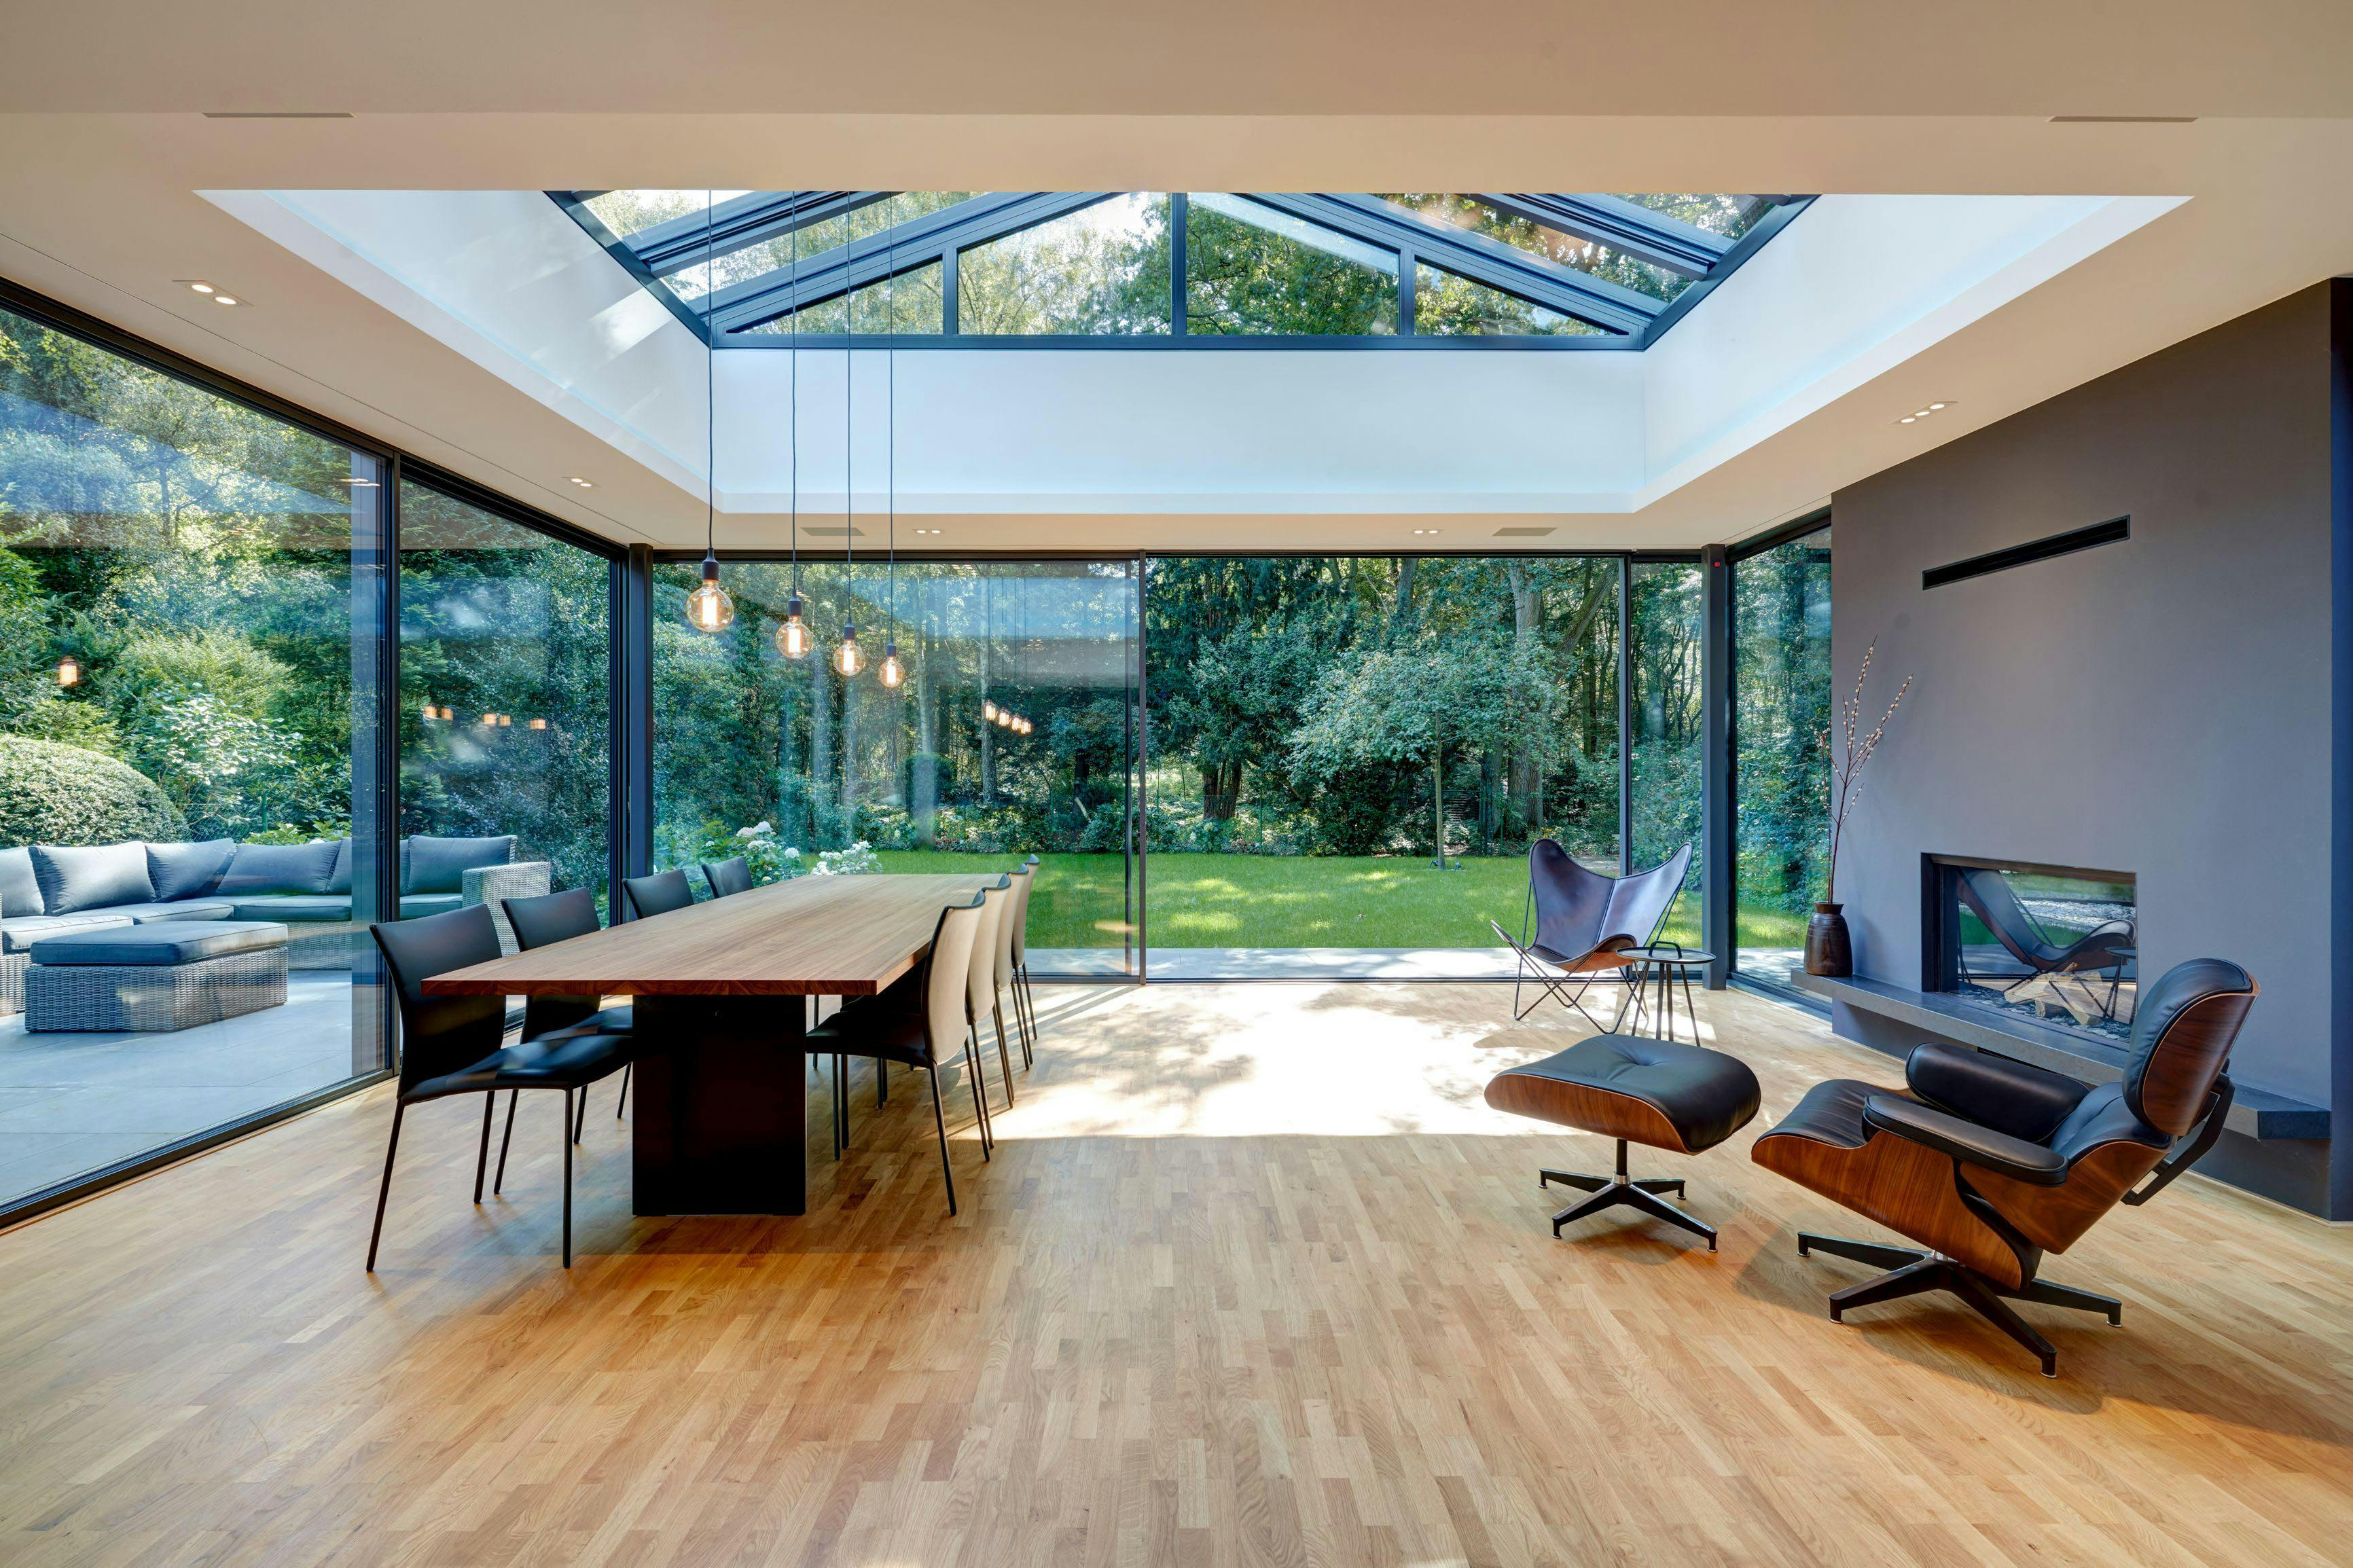 multi-track-sliding-glass-walls-can-open-an-entire-space